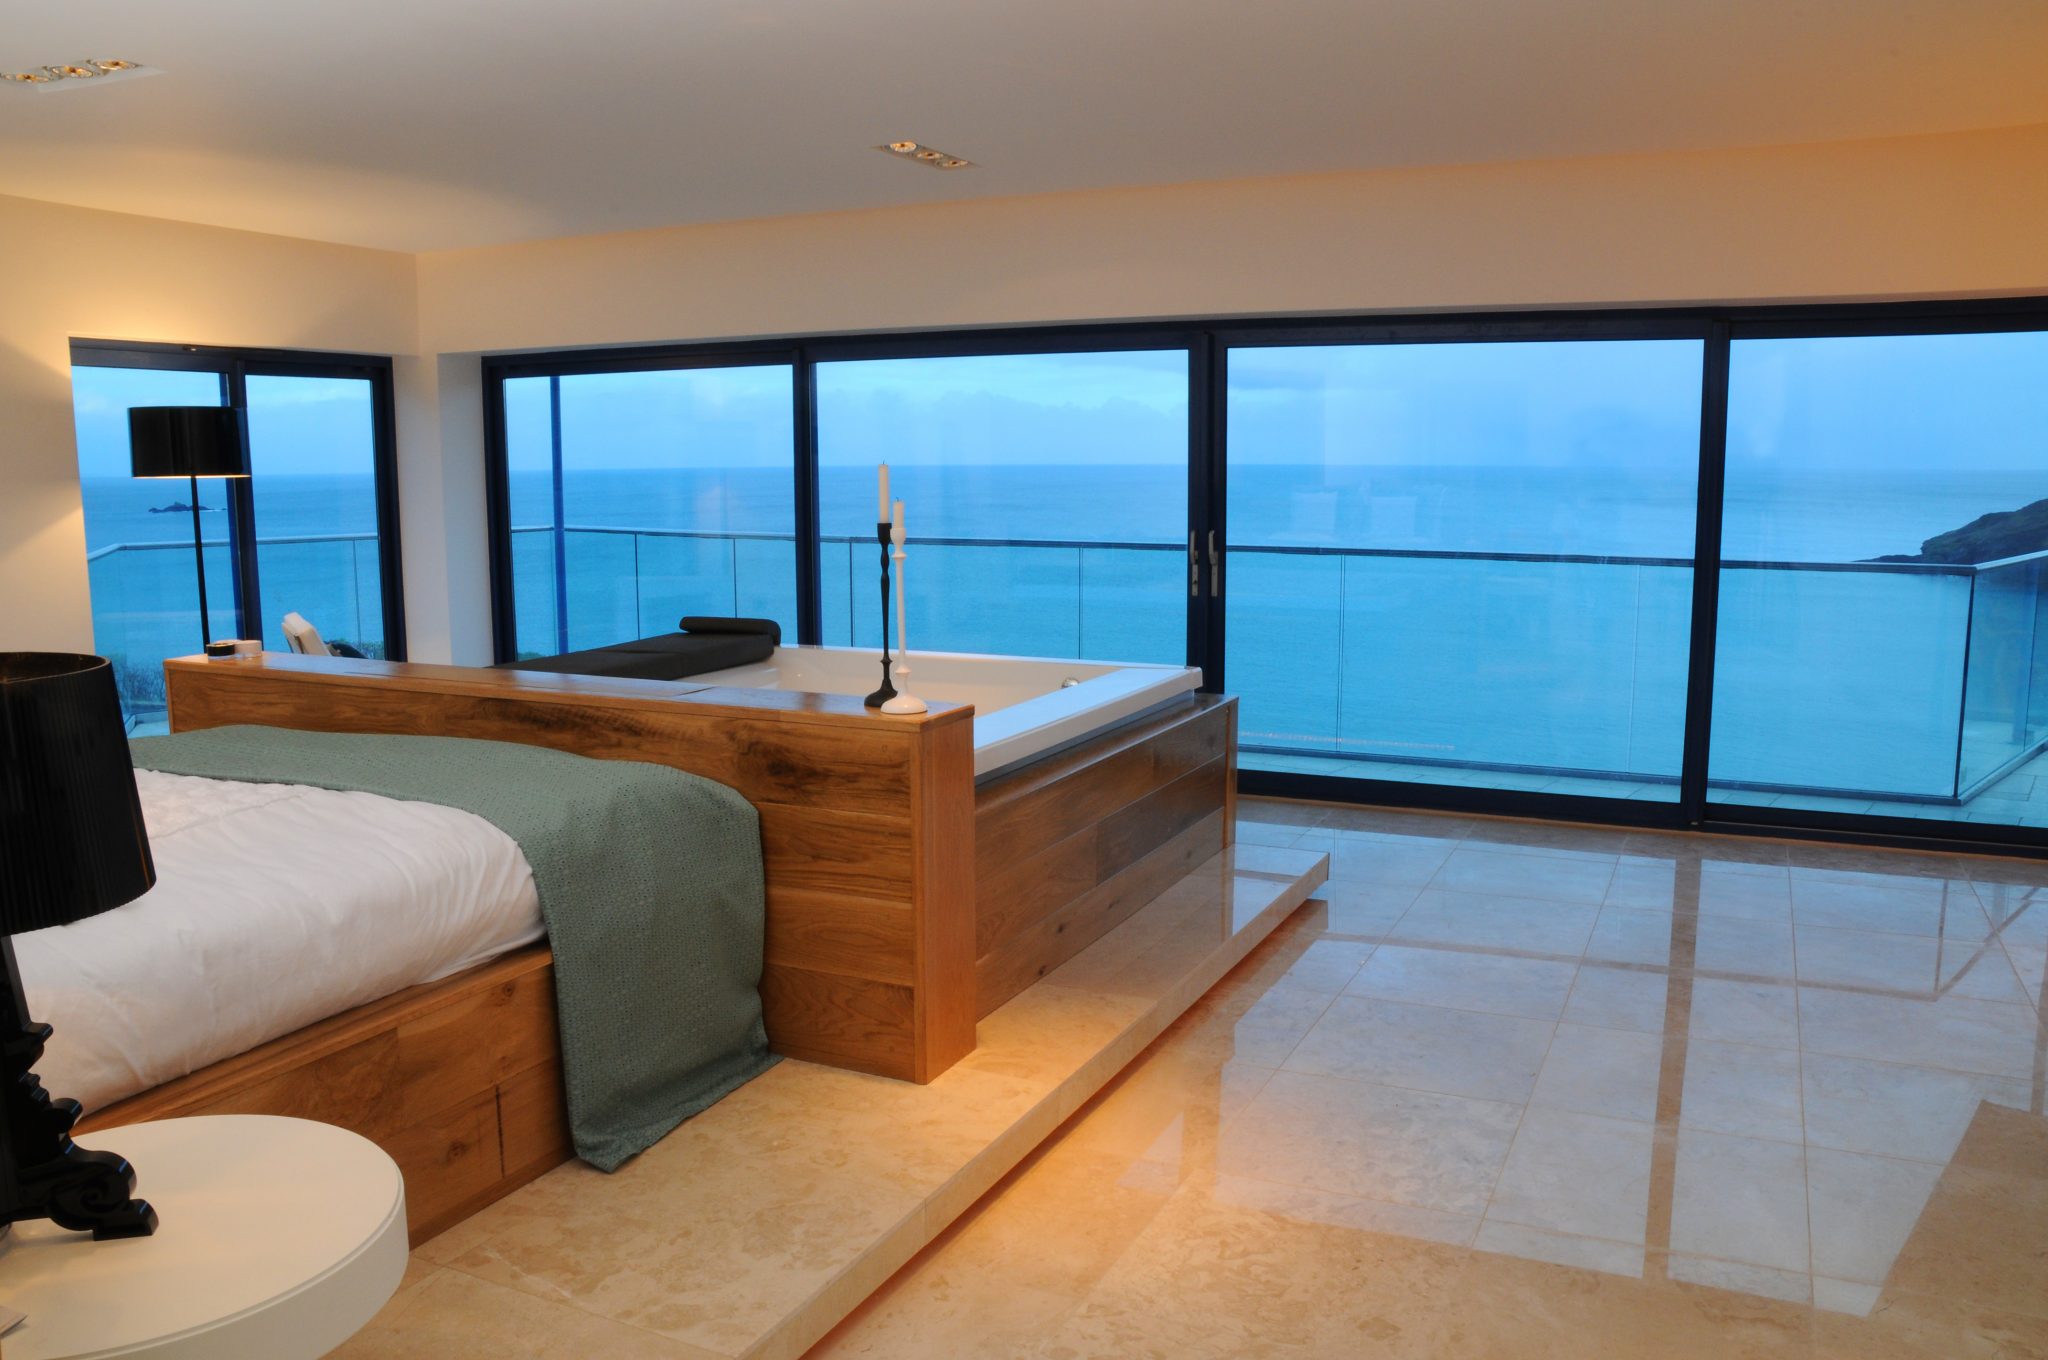 Stephens and stephens developers blue point gorran haven cornwall bedroom view